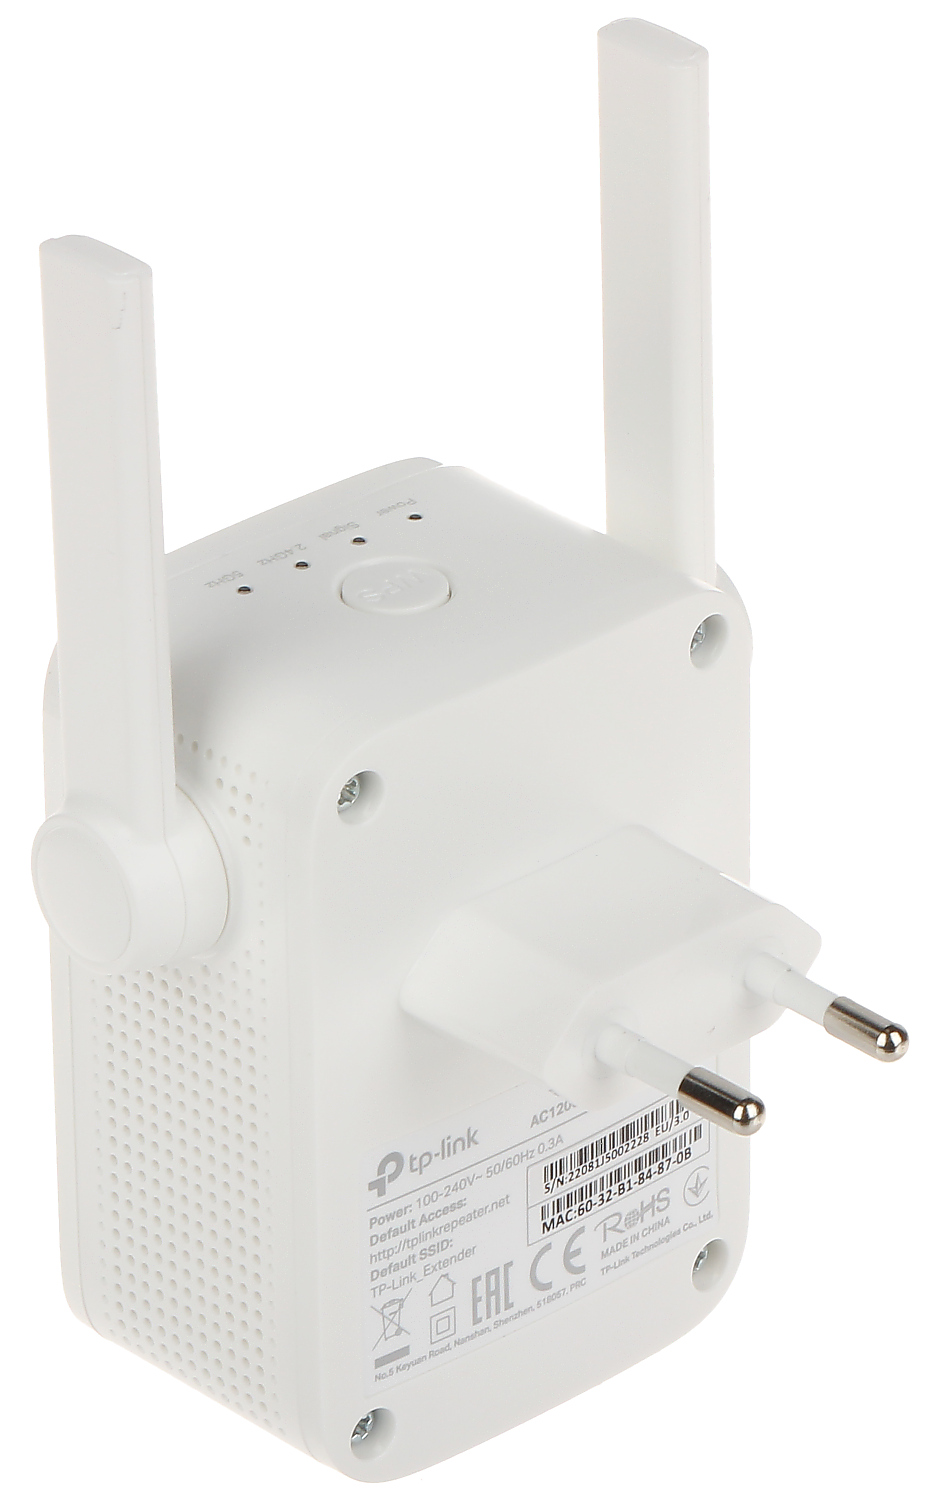 UNIVERSAL WI-FI RANGE EXTENDER TL-RE305 2.4 GHz, 5 GHz - Other Devices -  Delta